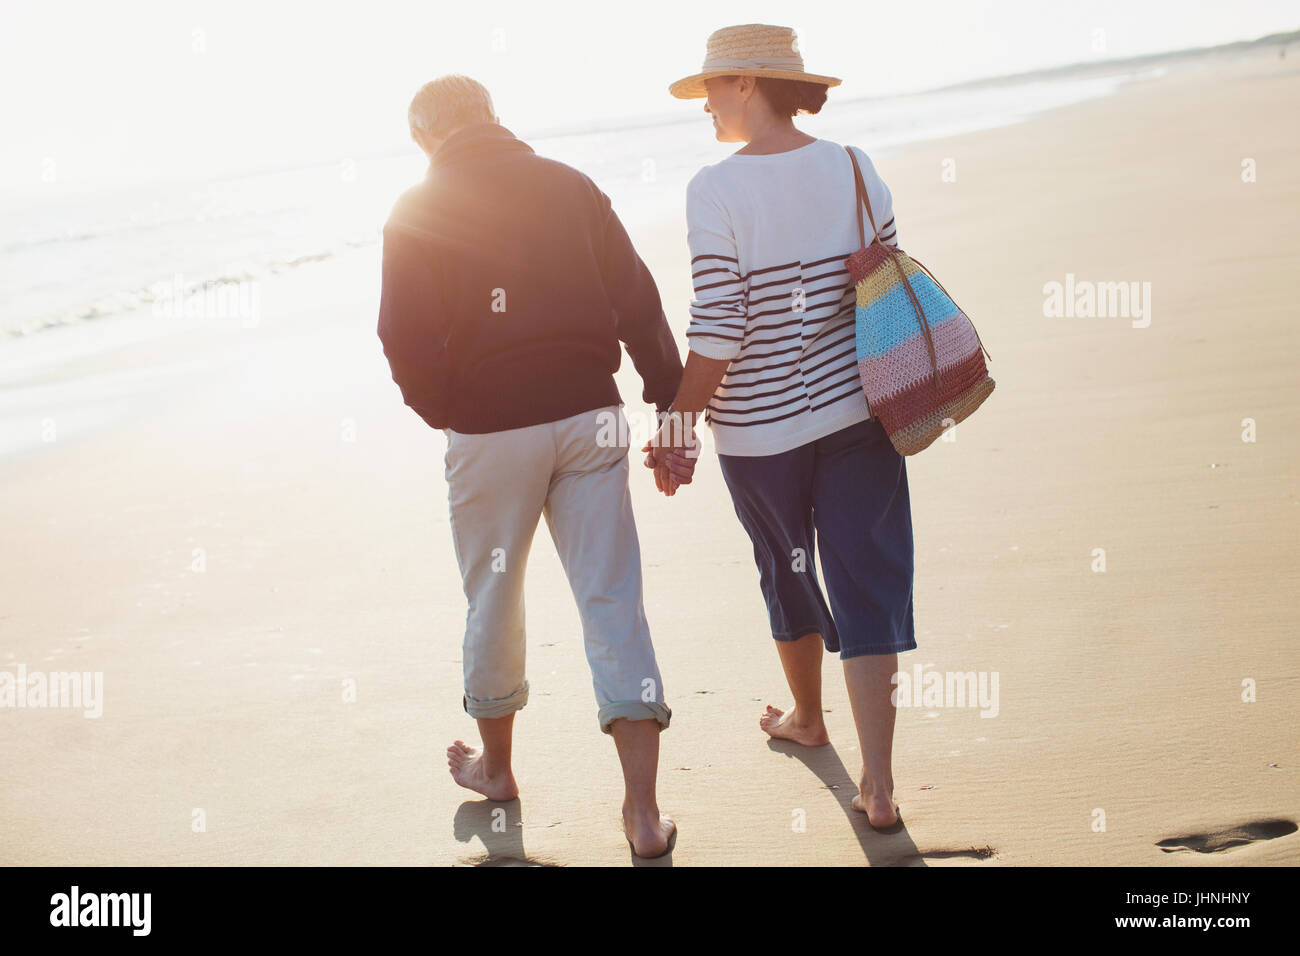 Barefoot mature couple holding hands and walking on sunny beach Stock Photo